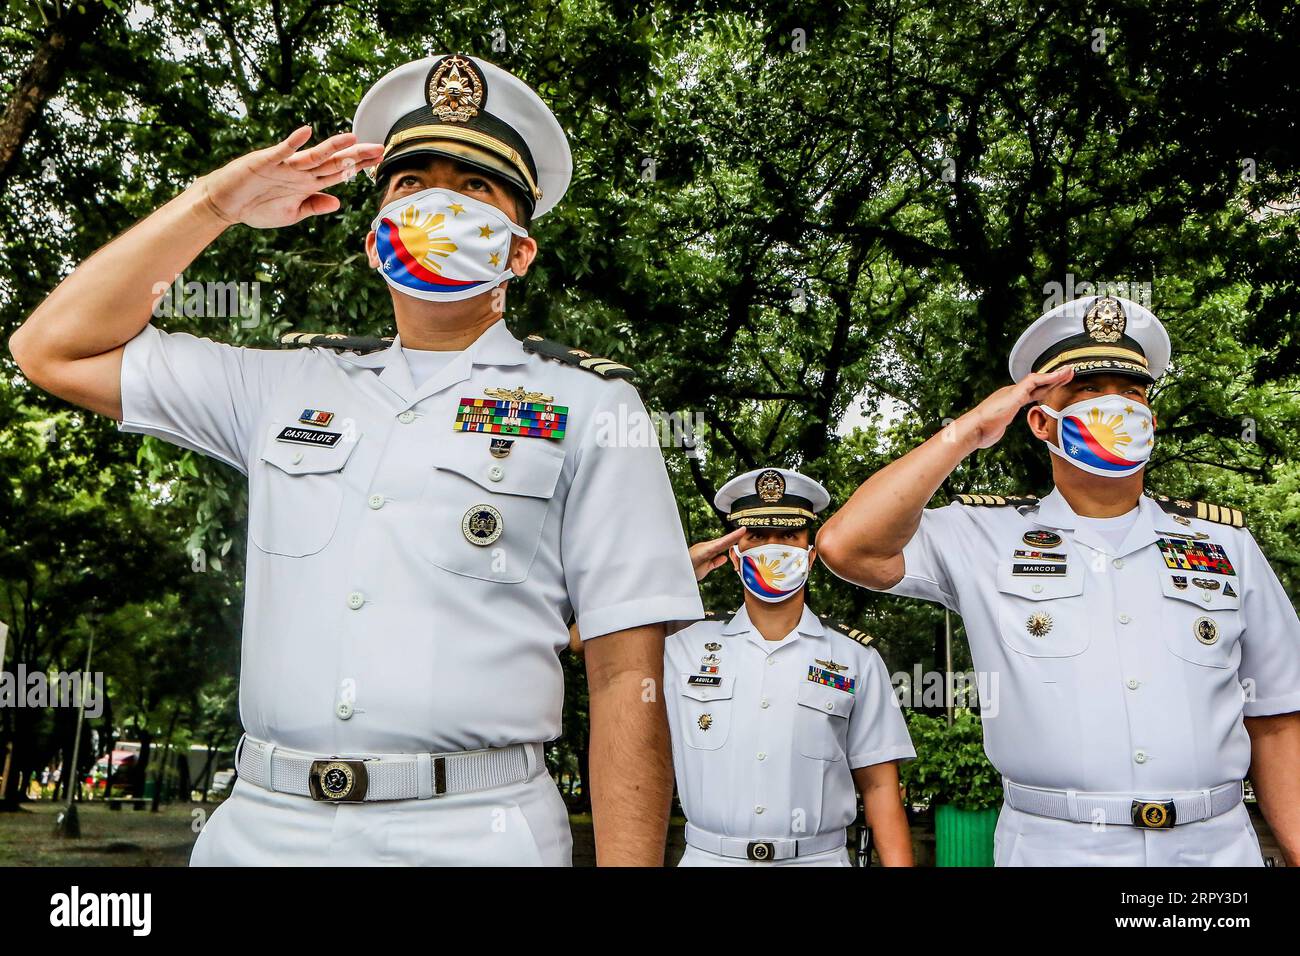 News Bilder des Tages 200612 -- MANILA, June 12, 2020 -- Officers from the Philippine Navy attend the celebration of the 122nd Philippine Independence Day in Manila, the Philippines on June 12, 2020. The Philippines celebrated the 122nd anniversary of the proclamation of independence from Spanish rule.  THE PHILIPPINES-MANILA-INDEPENDENCE DAY-CELEBRATION ROUELLExUMALI PUBLICATIONxNOTxINxCHN Stock Photo